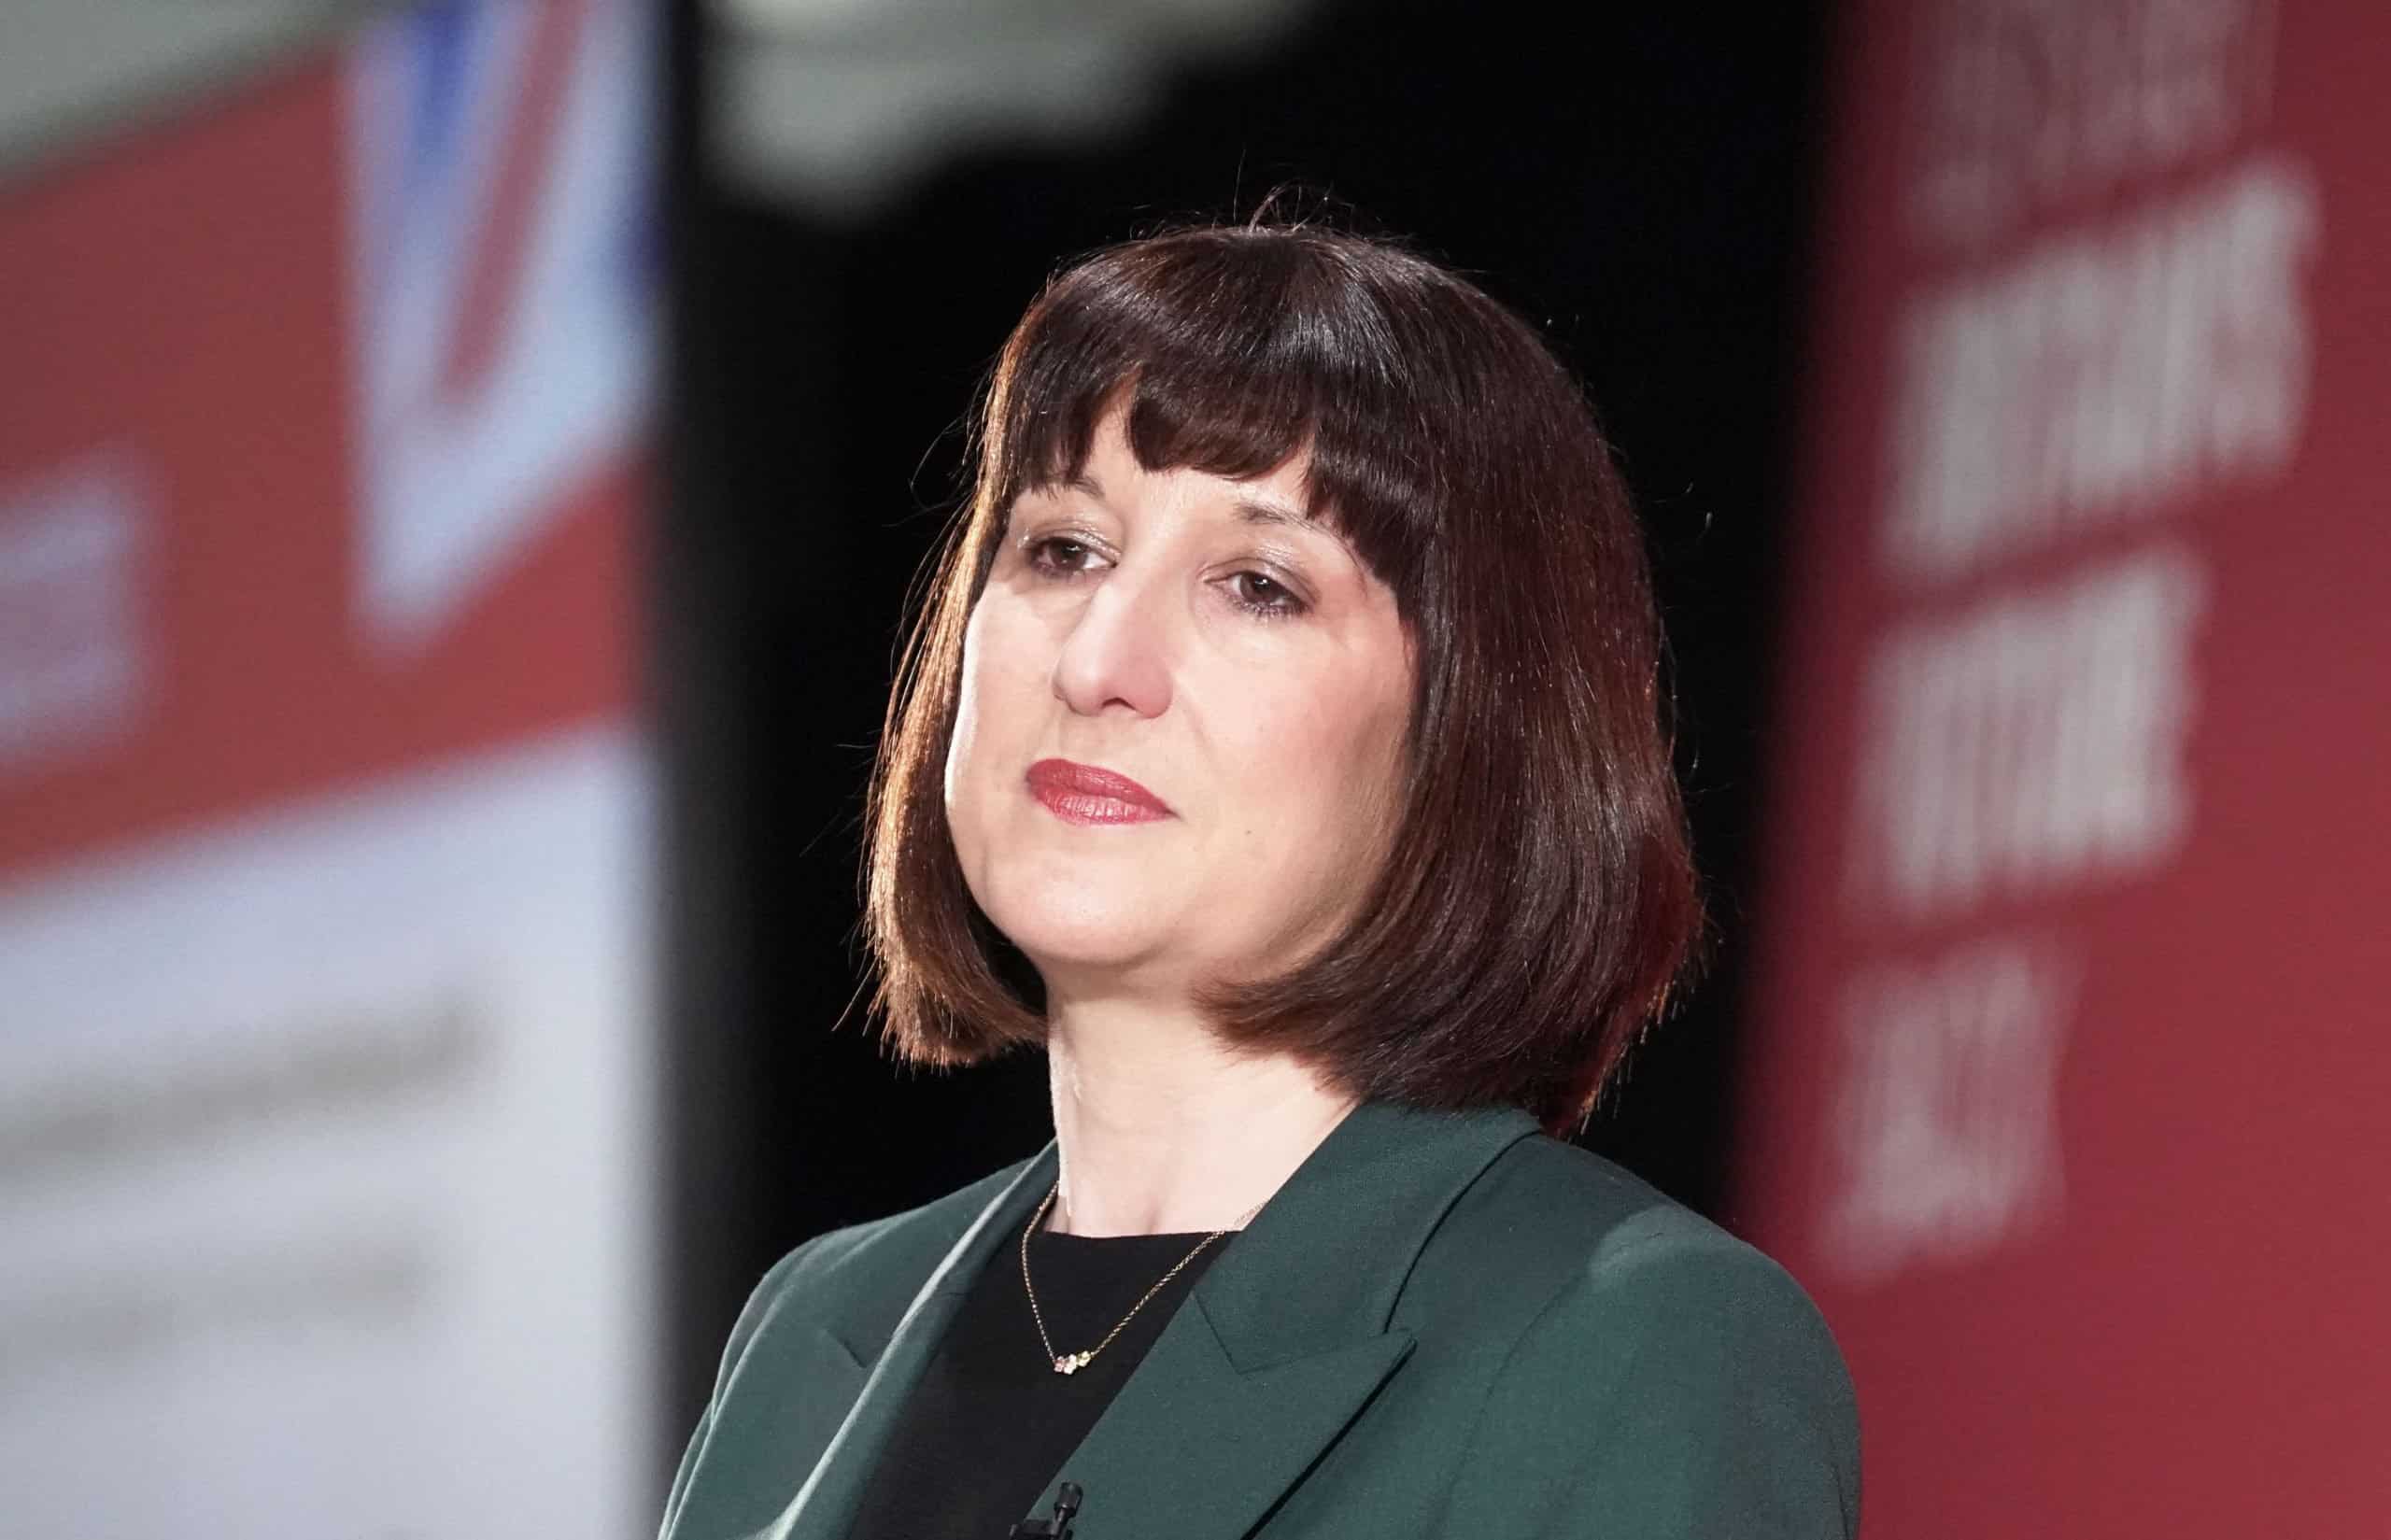 Rachel Reeves accuses Government of ‘gaslighting’ voters over economy